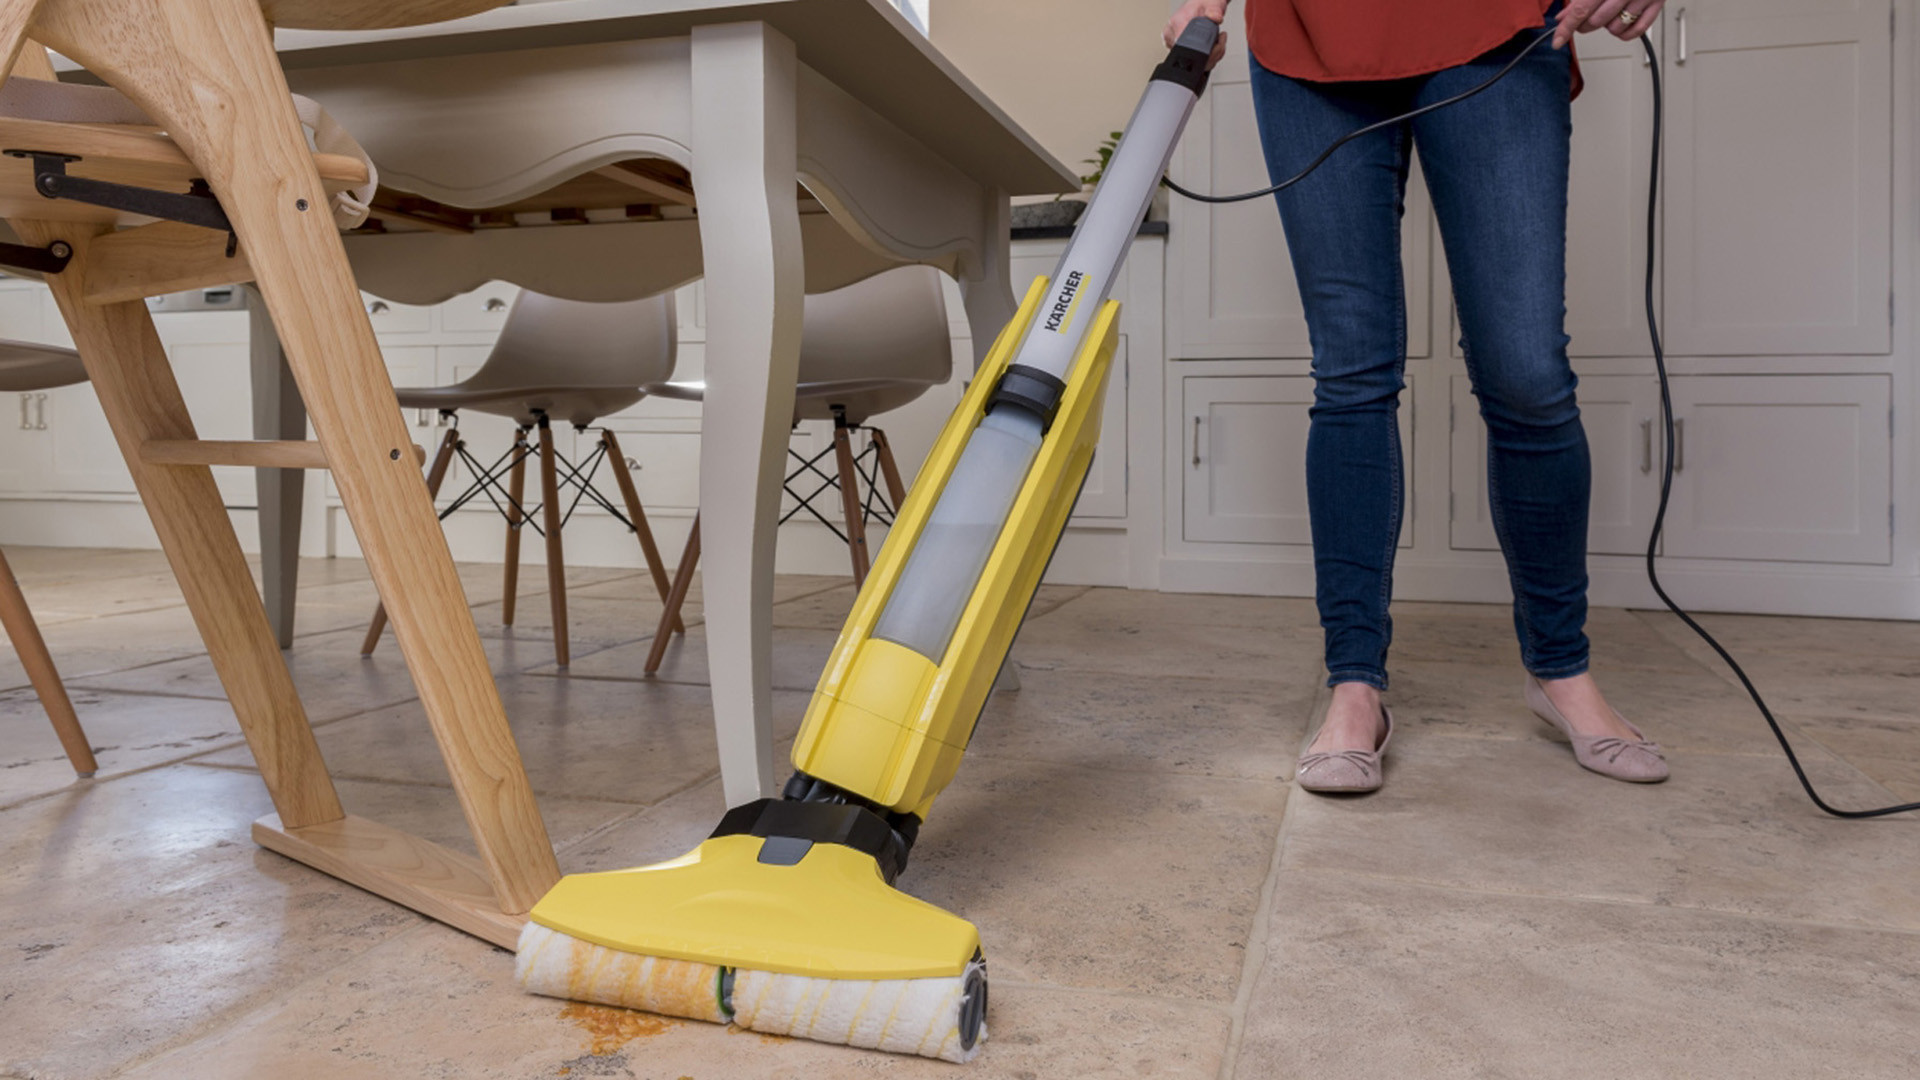 12 Fantastic Hoover Hardwood Floor Cleaner Floormate Spinscrub 2024 free download hoover hardwood floor cleaner floormate spinscrub of karcher fc5 hard floor cleaner review trusted reviews pertaining to karcher fc5 5 1